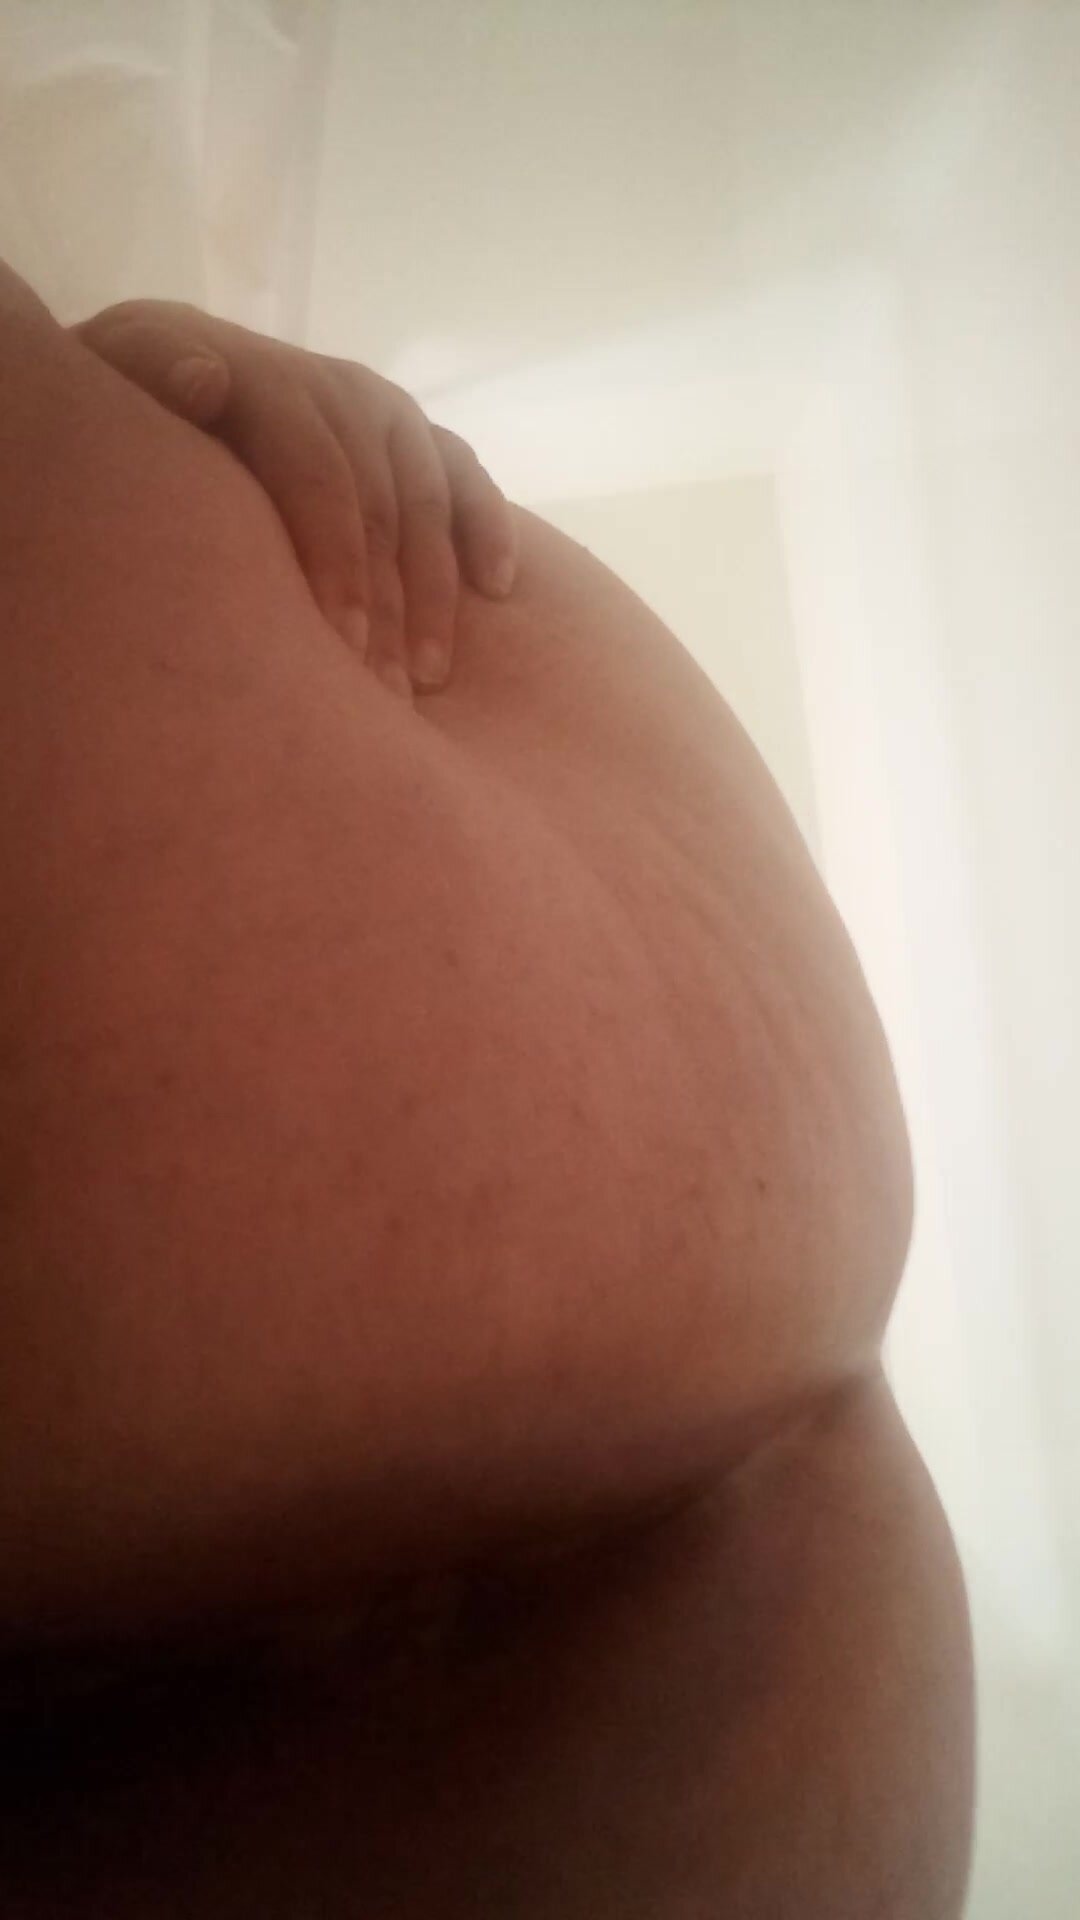 My hairy butt hole and my big ass